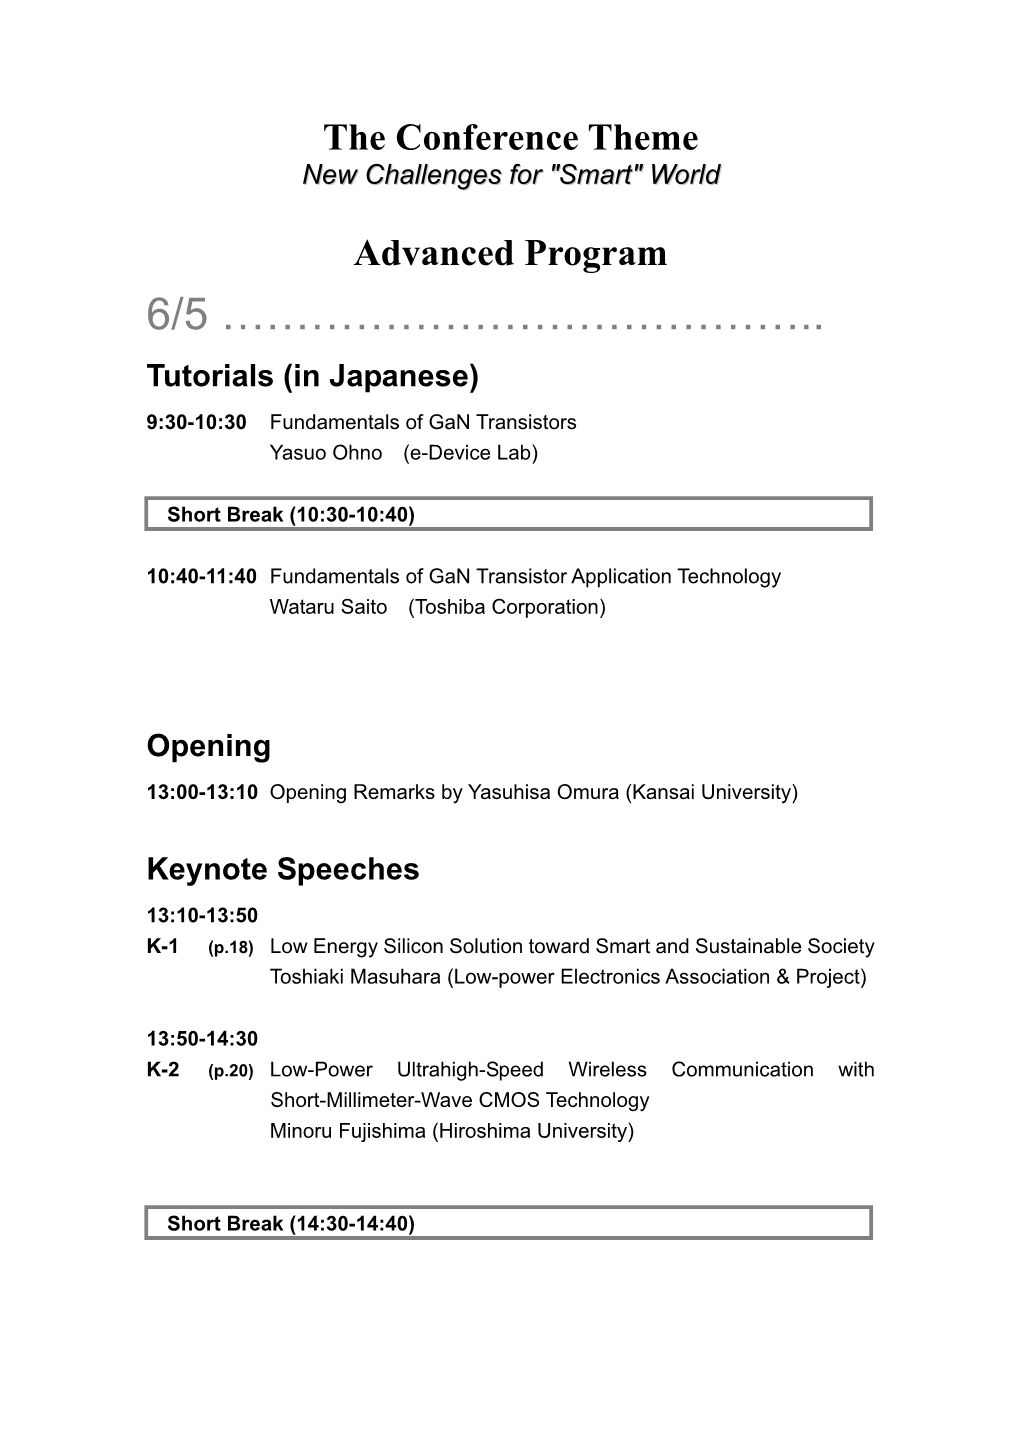 Announcement of the 2013 International Meeting for Future of Electron Devices, Kansai